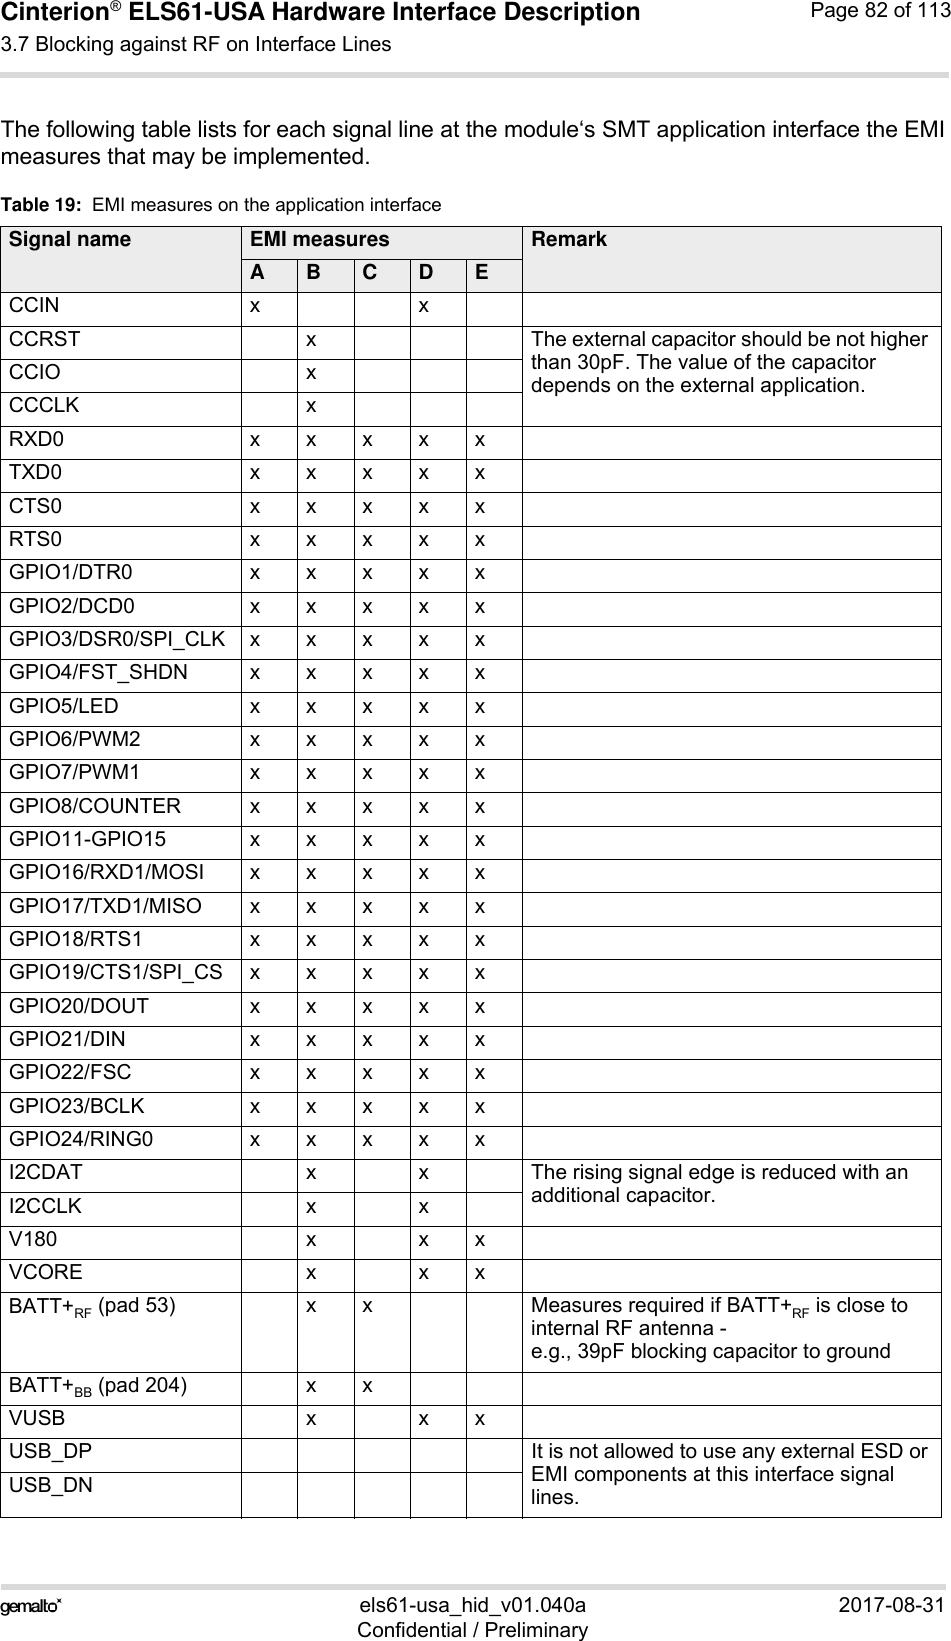 Cinterion® ELS61-USA Hardware Interface Description3.7 Blocking against RF on Interface Lines83els61-usa_hid_v01.040a 2017-08-31Confidential / PreliminaryPage 82 of 113The following table lists for each signal line at the module‘s SMT application interface the EMImeasures that may be implemented.Table 19:  EMI measures on the application interfaceSignal name EMI measures RemarkABCDECCIN x xCCRST x The external capacitor should be not higher than 30pF. The value of the capacitor depends on the external application.CCIO xCCCLK xRXD0 xxxxxTXD0 xxxxxCTS0 xxxxxRTS0 xxxxxGPIO1/DTR0 xxxxxGPIO2/DCD0 xxxxxGPIO3/DSR0/SPI_CLKxxxxxGPIO4/FST_SHDN xxxxxGPIO5/LED xxxxxGPIO6/PWM2 xxxxxGPIO7/PWM1 xxxxxGPIO8/COUNTER xxxxxGPIO11-GPIO15 xxxxxGPIO16/RXD1/MOSIxxxxxGPIO17/TXD1/MISOxxxxxGPIO18/RTS1 xxxxxGPIO19/CTS1/SPI_CSxxxxxGPIO20/DOUT xxxxxGPIO21/DIN xxxxxGPIO22/FSC xxxxxGPIO23/BCLK xxxxxGPIO24/RING0 xxxxxI2CDAT  x x The rising signal edge is reduced with an additional capacitor.I2CCLK x xV180 x x xVCORE x x xBATT+RF (pad 53) x x Measures required if BATT+RF is close to internal RF antenna -e.g., 39pF blocking capacitor to groundBATT+BB (pad 204) x xVUSB x x xUSB_DP It is not allowed to use any external ESD or EMI components at this interface signal lines.USB_DN